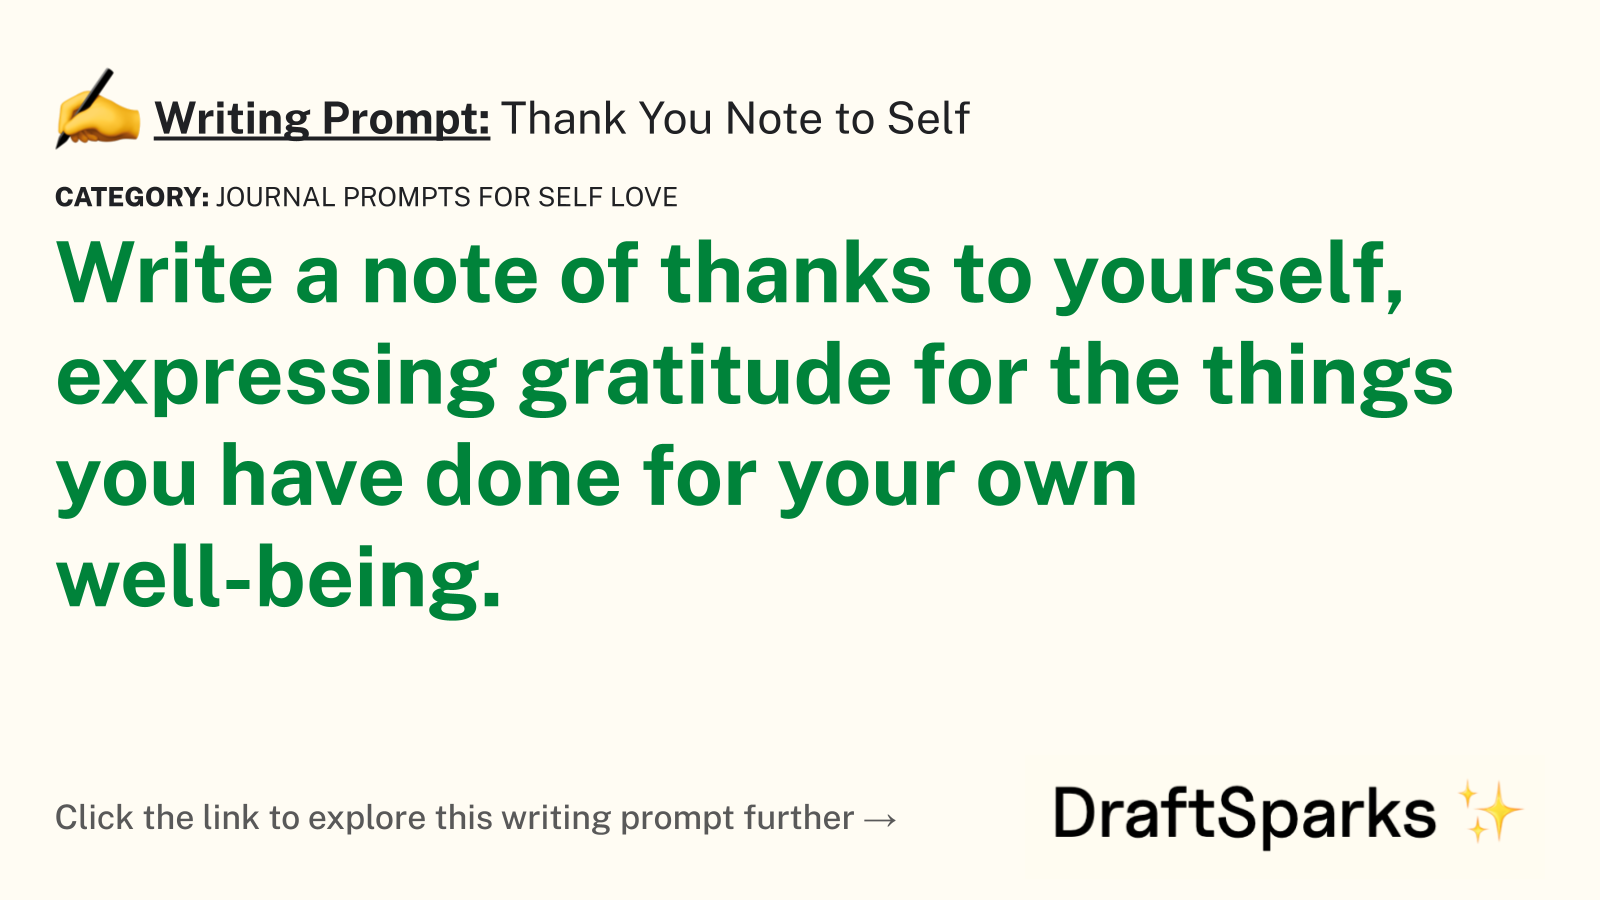 Thank You Note to Self